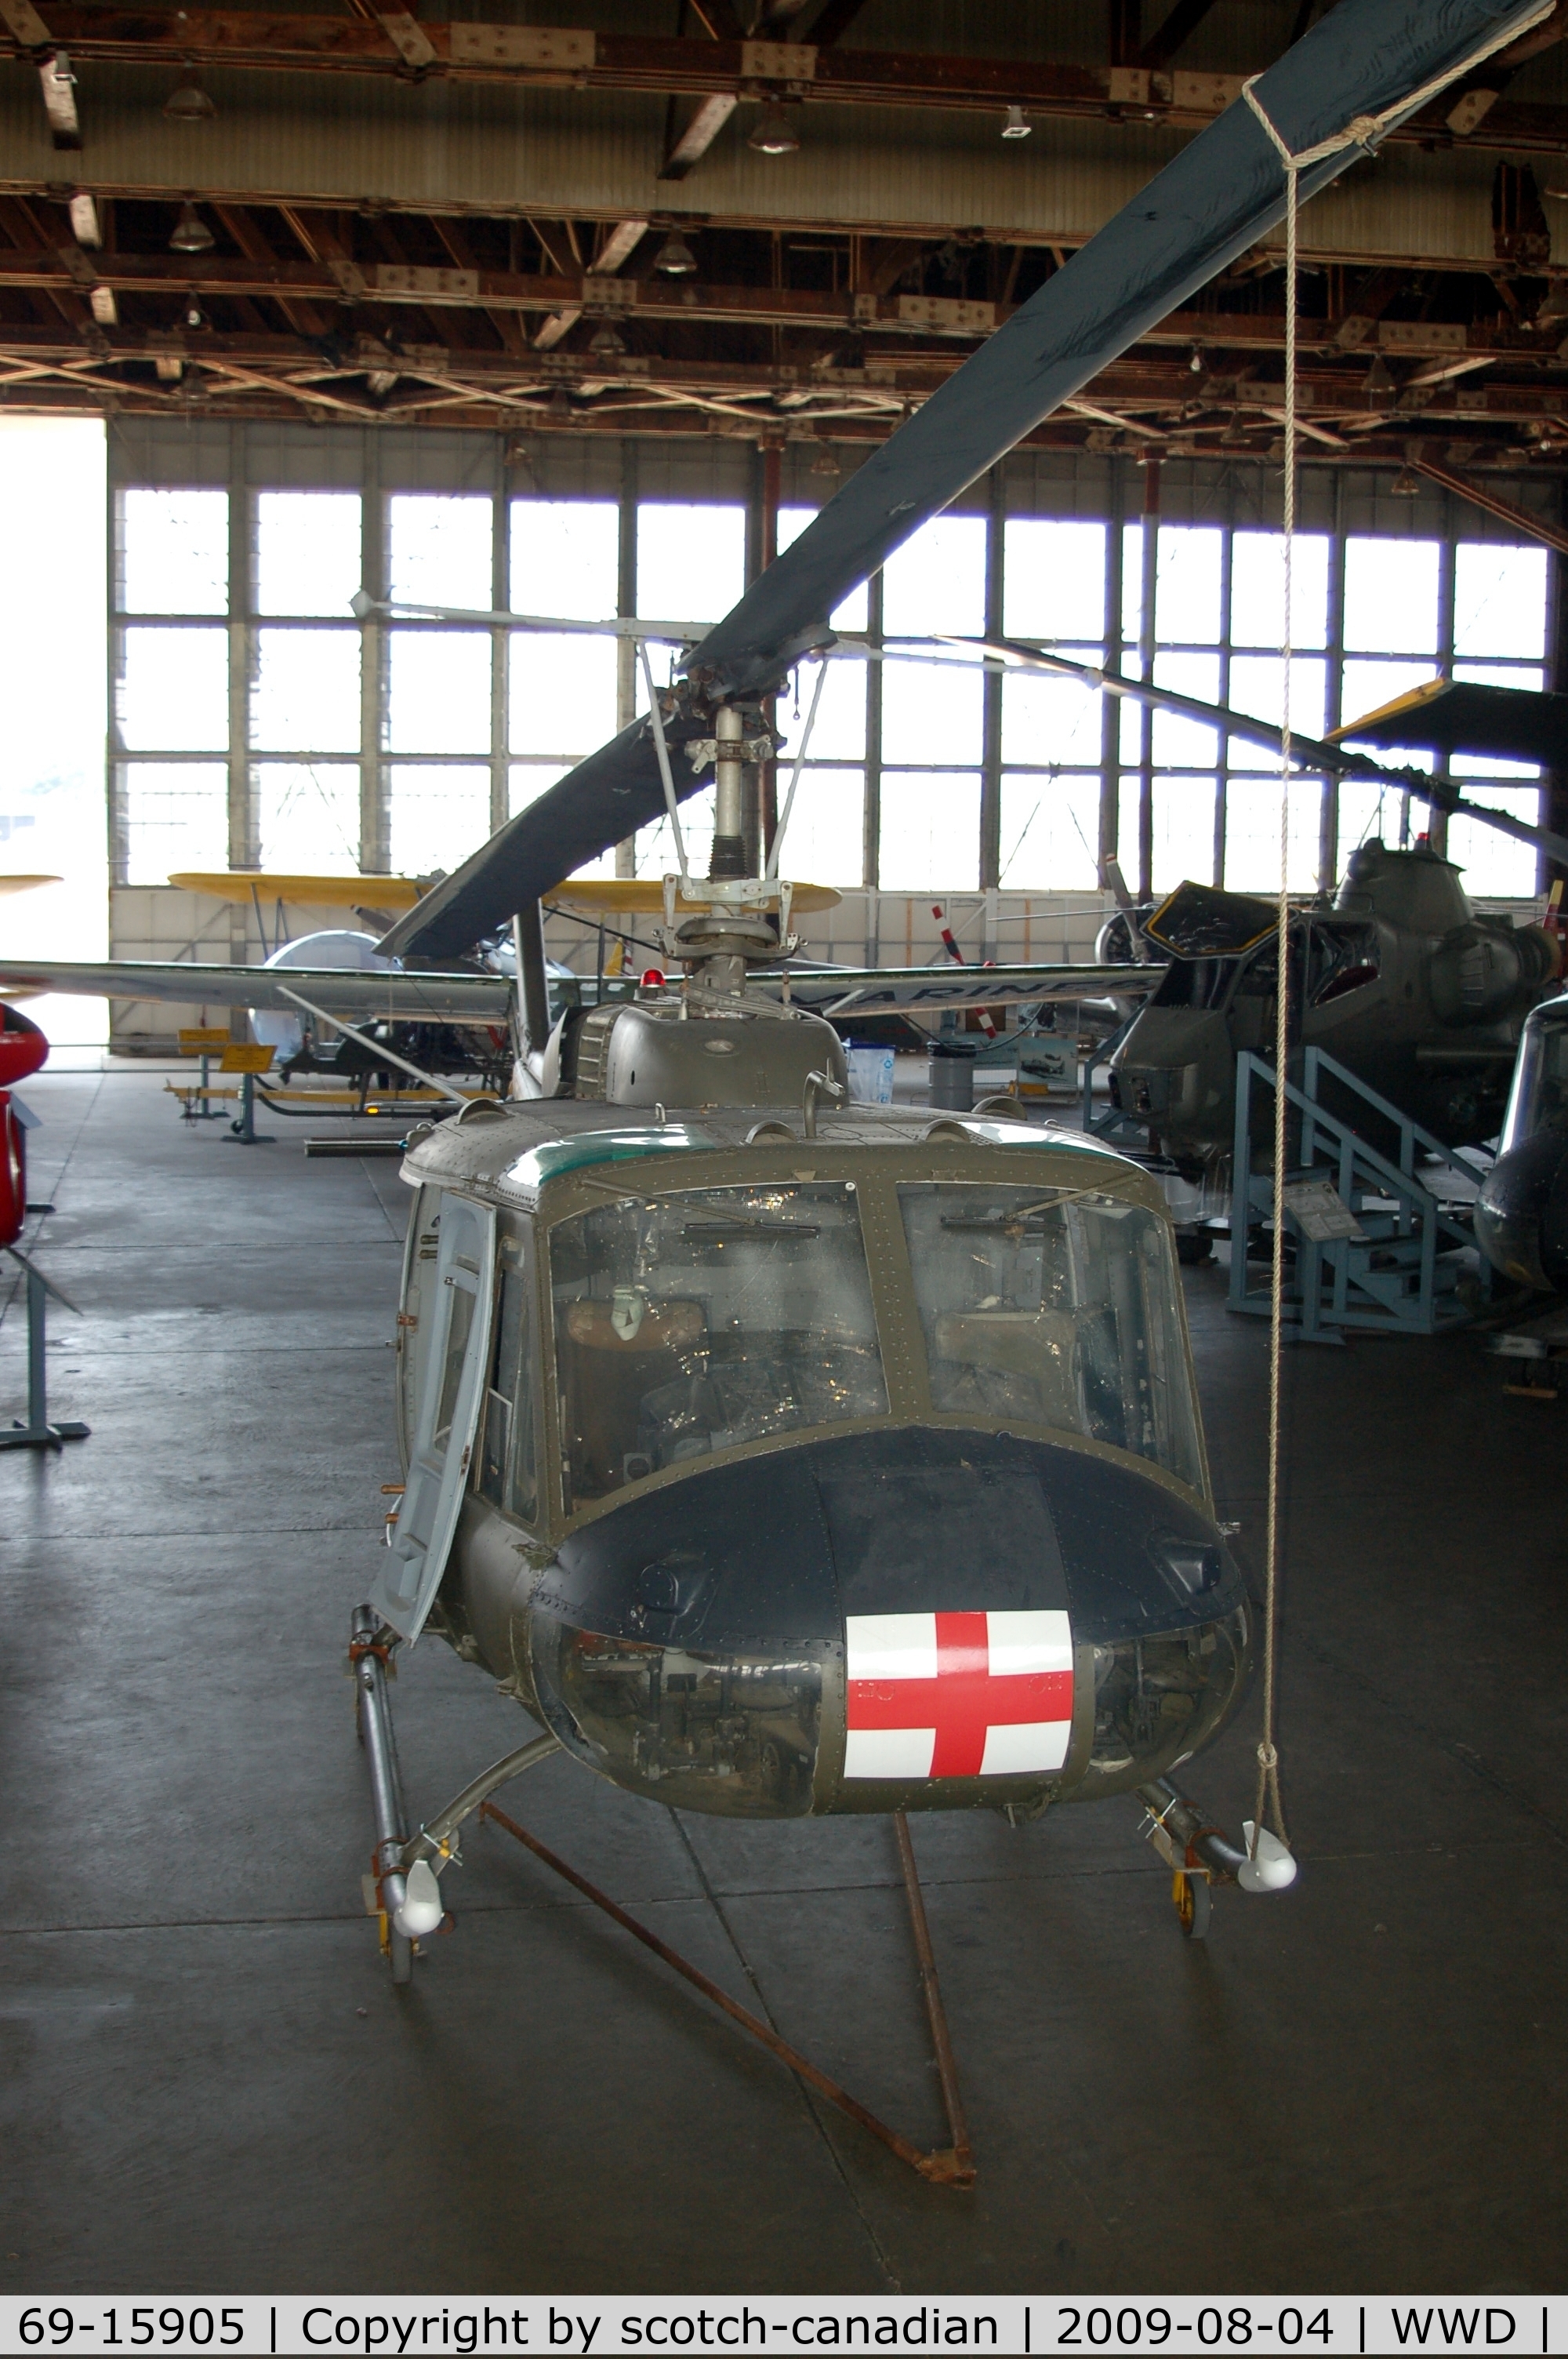 69-15905, 1970 Bell UH-1H Iroquois C/N 12193, 1970 Bell UH-1H Iroquois Helicopter at the Naval Air Station Wildwood Aviation Museum, Cape May County Airport, Wildwood, NJ